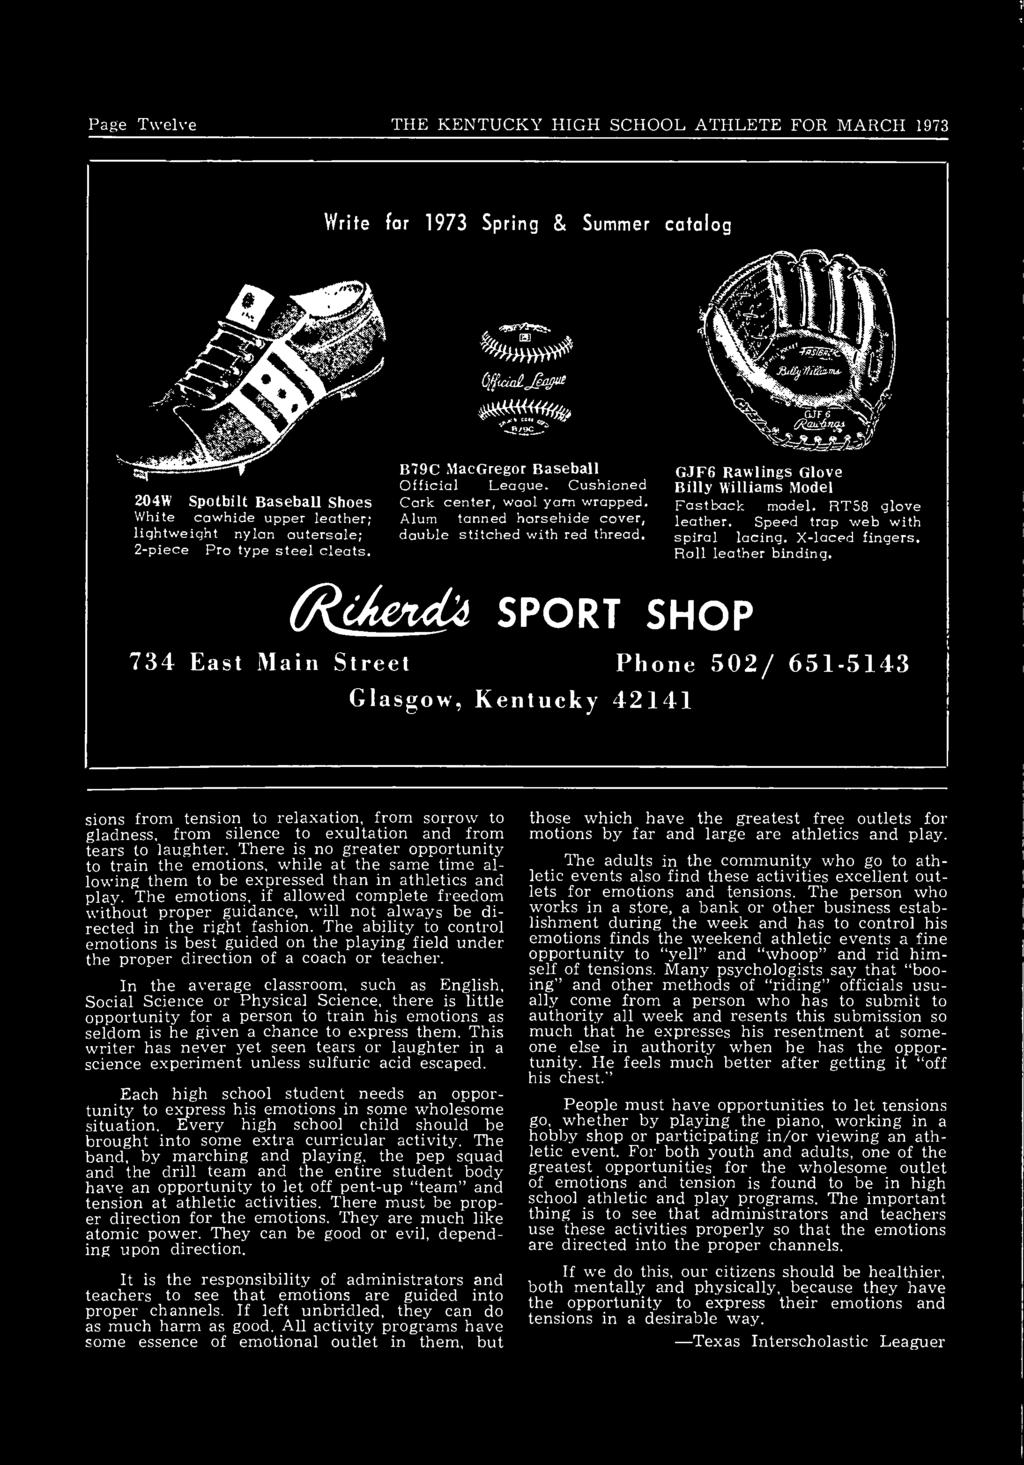 GJF6 Rawlings Glove Billy Williams Model Fast back model. RT58 glove leather. Speed trap web with spiral lacing. X-laced fingers. Roll leather binding.